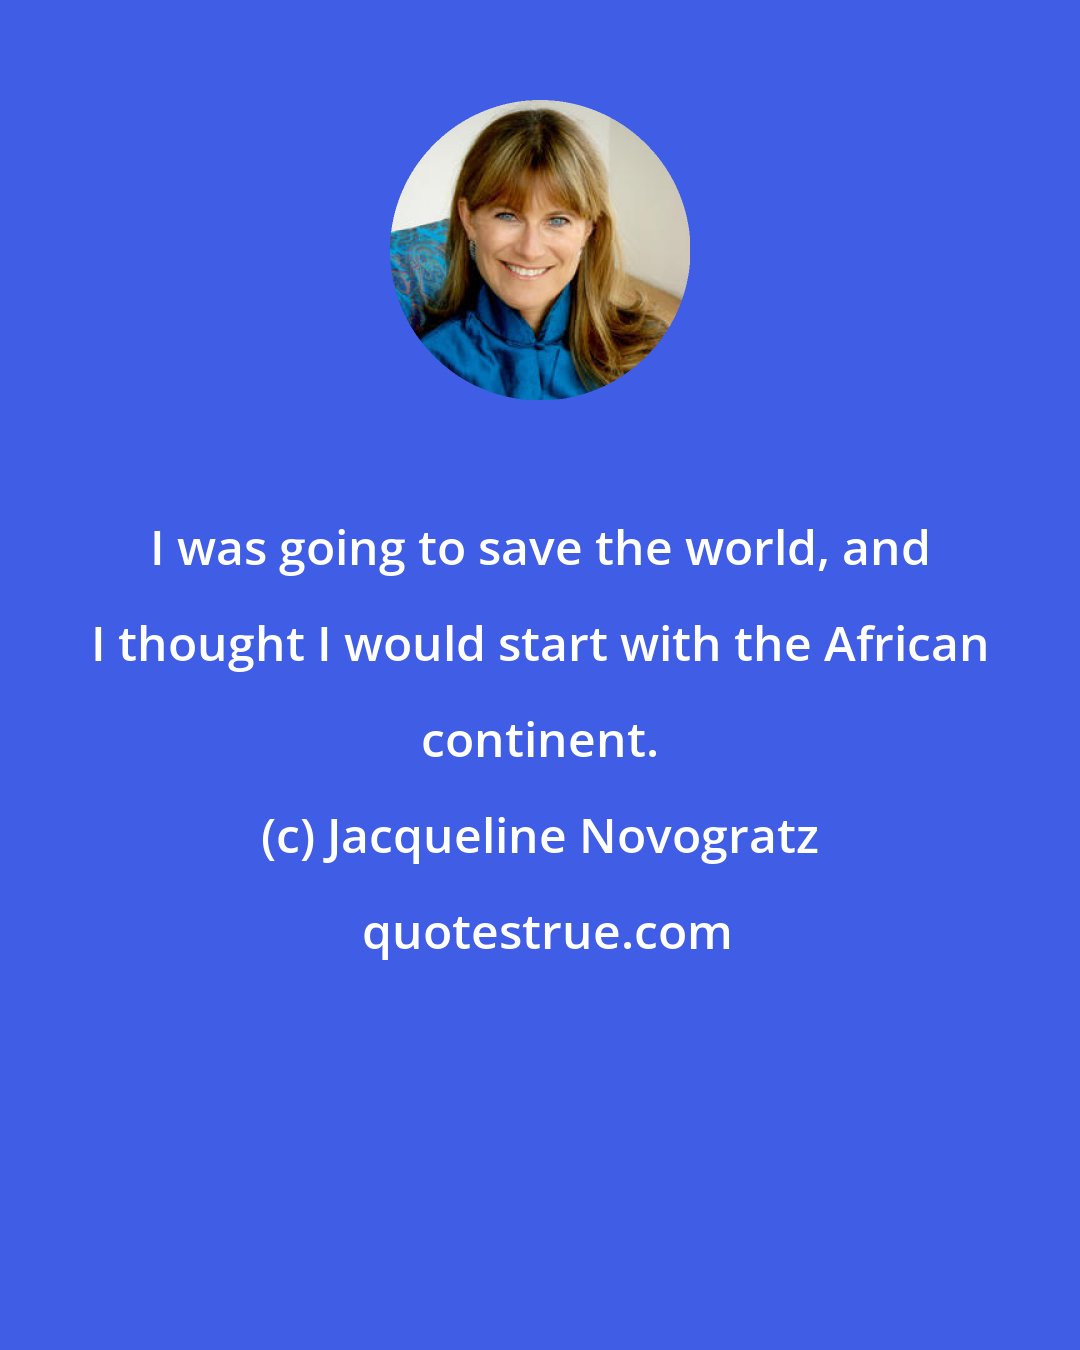 Jacqueline Novogratz: I was going to save the world, and I thought I would start with the African continent.